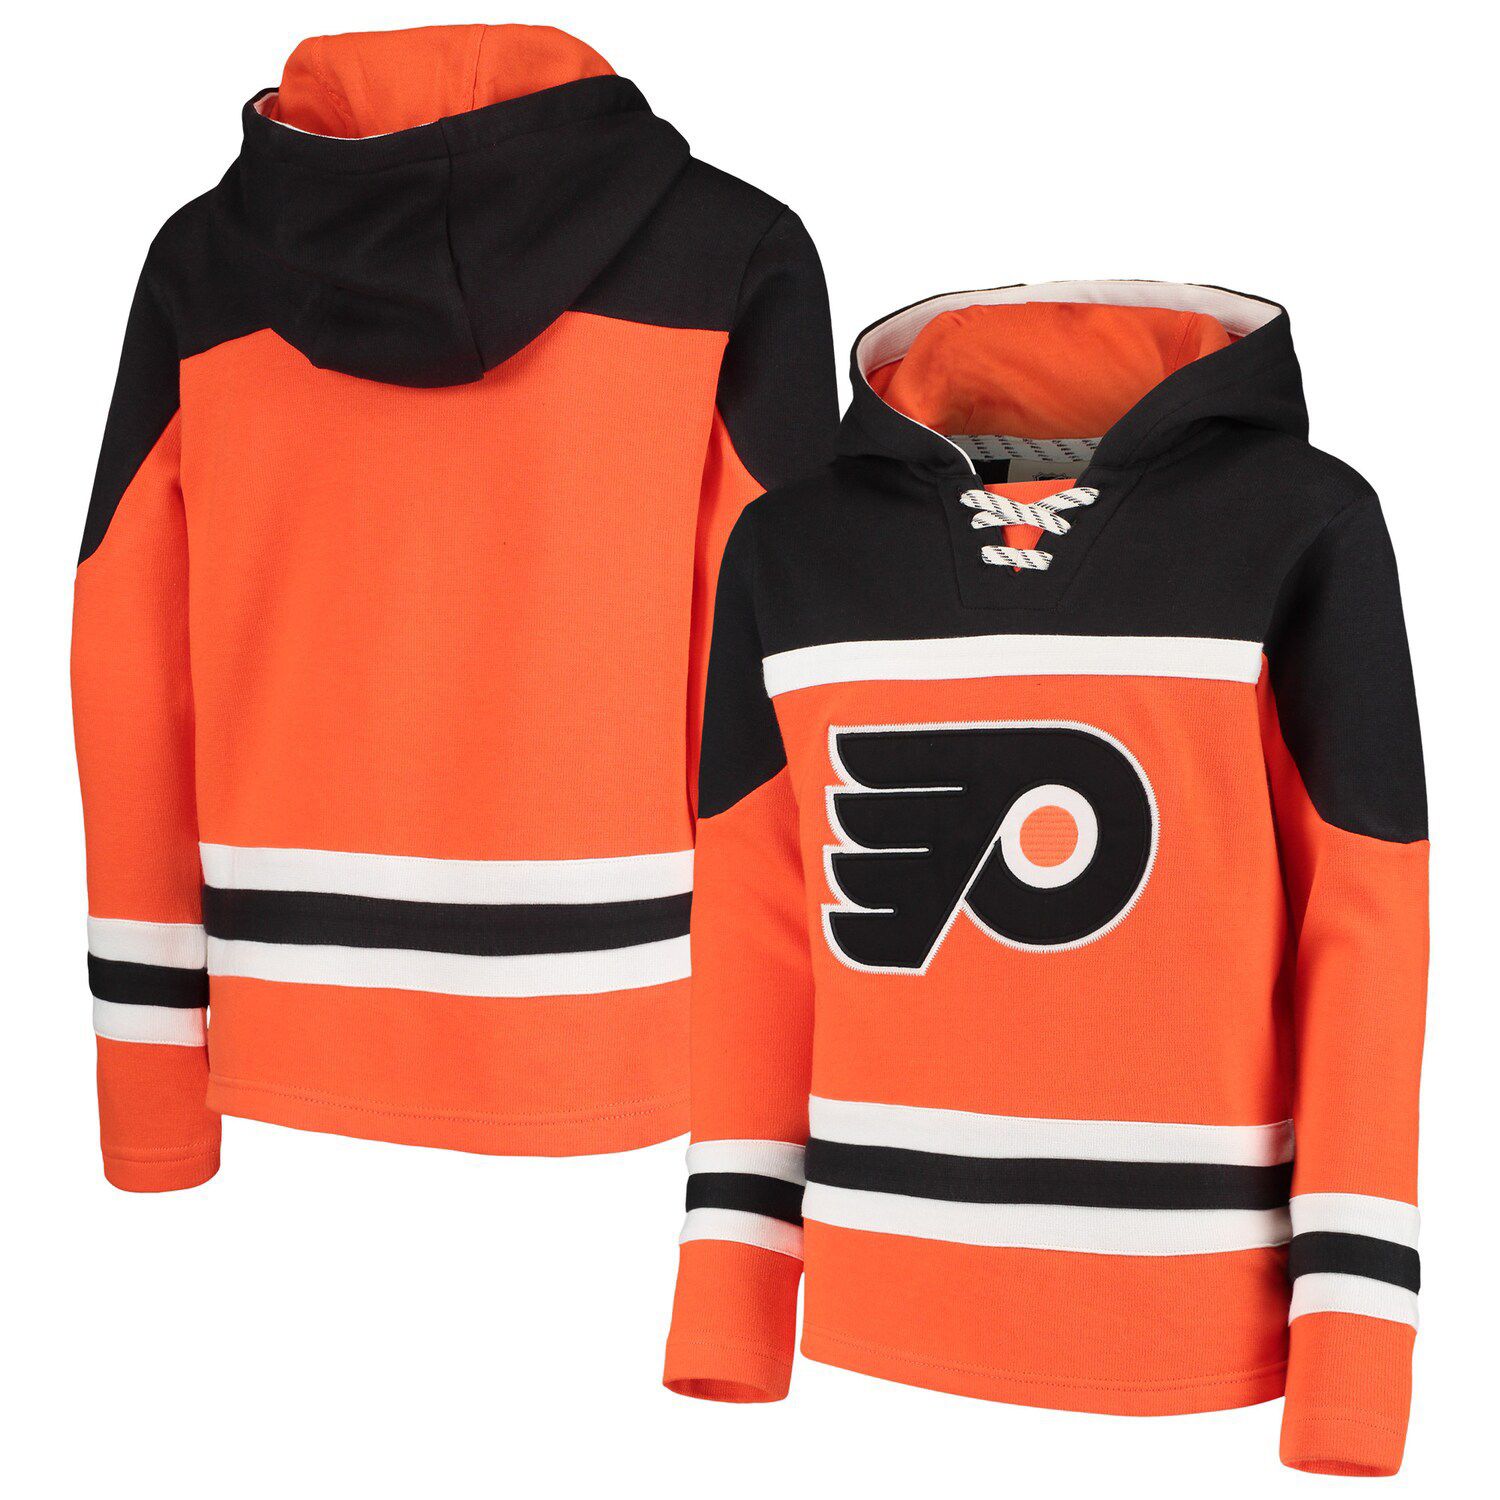 flyers lace up hoodie